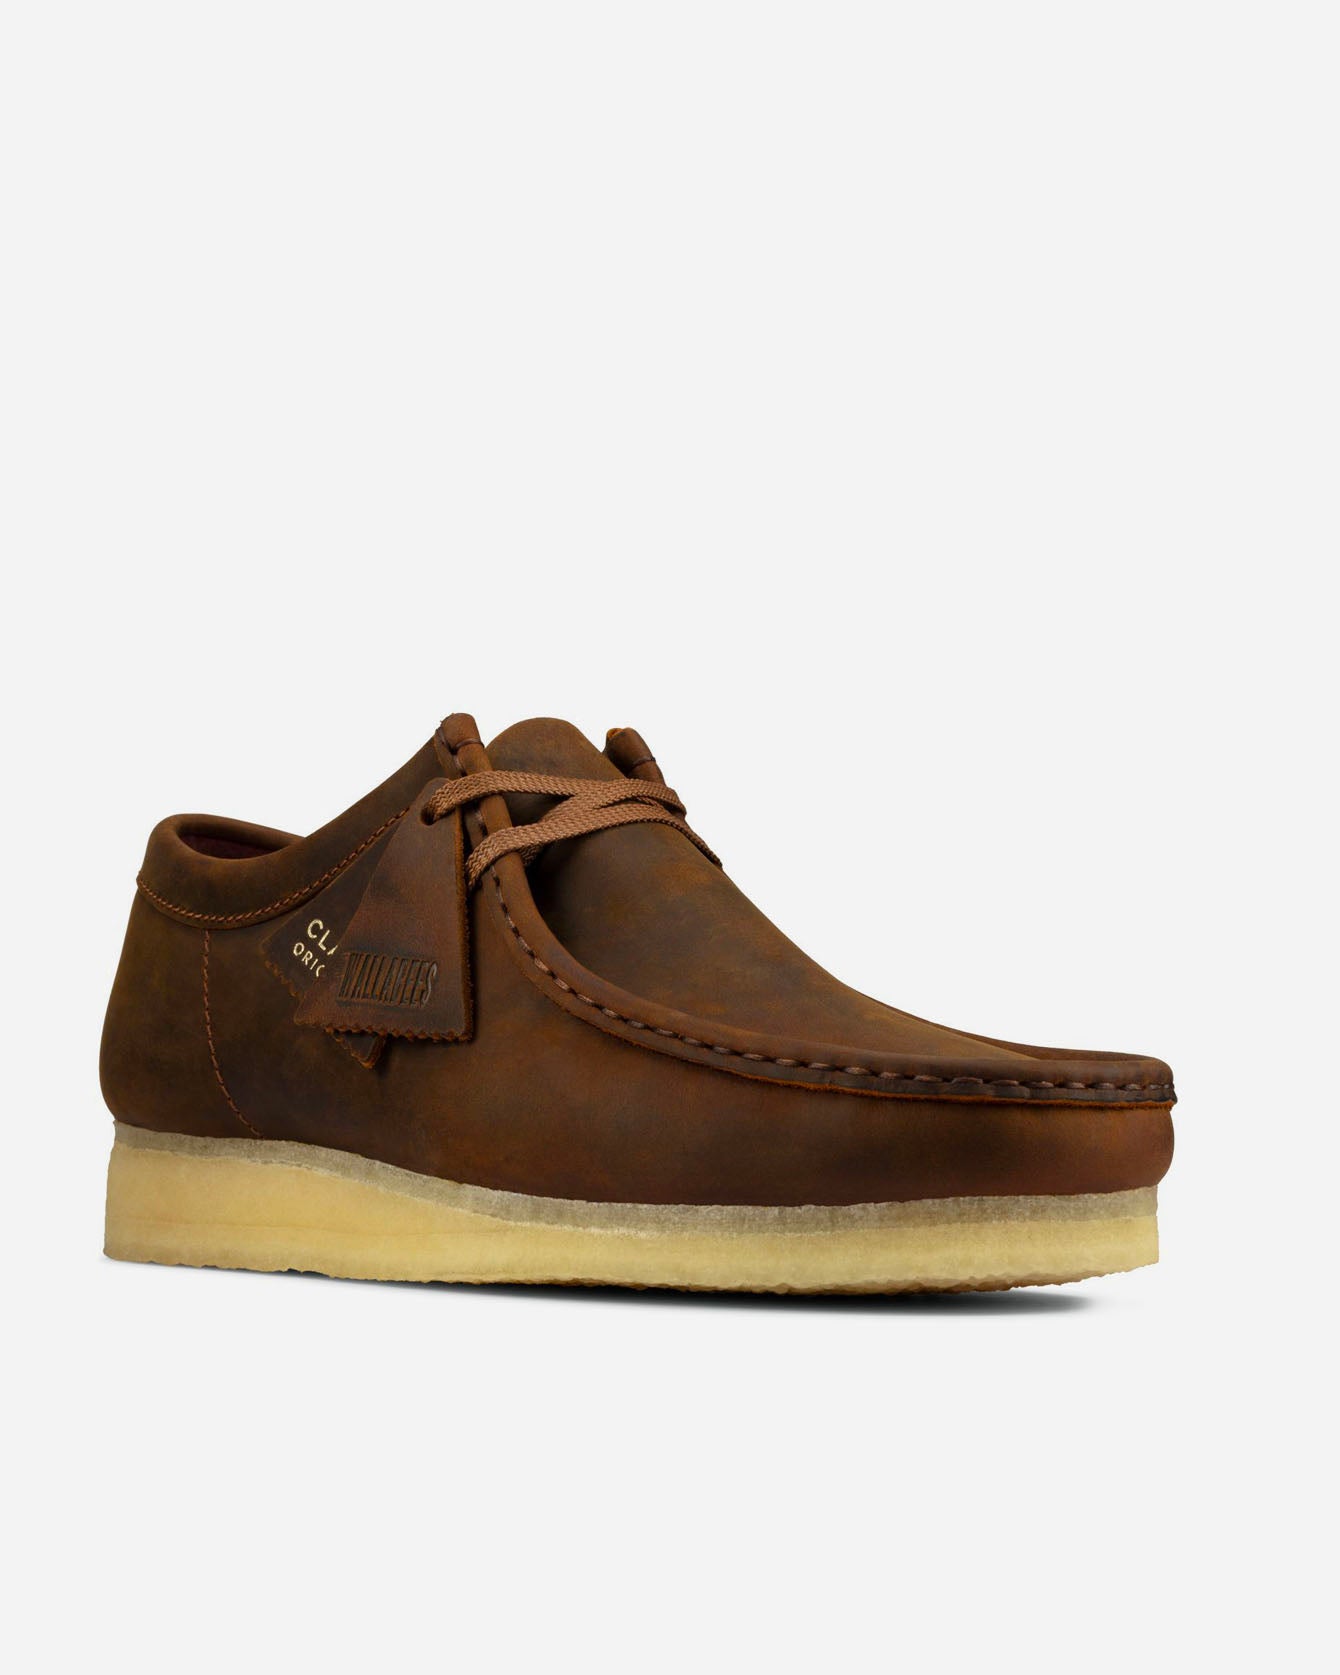 Wallabee - Beeswax Leather